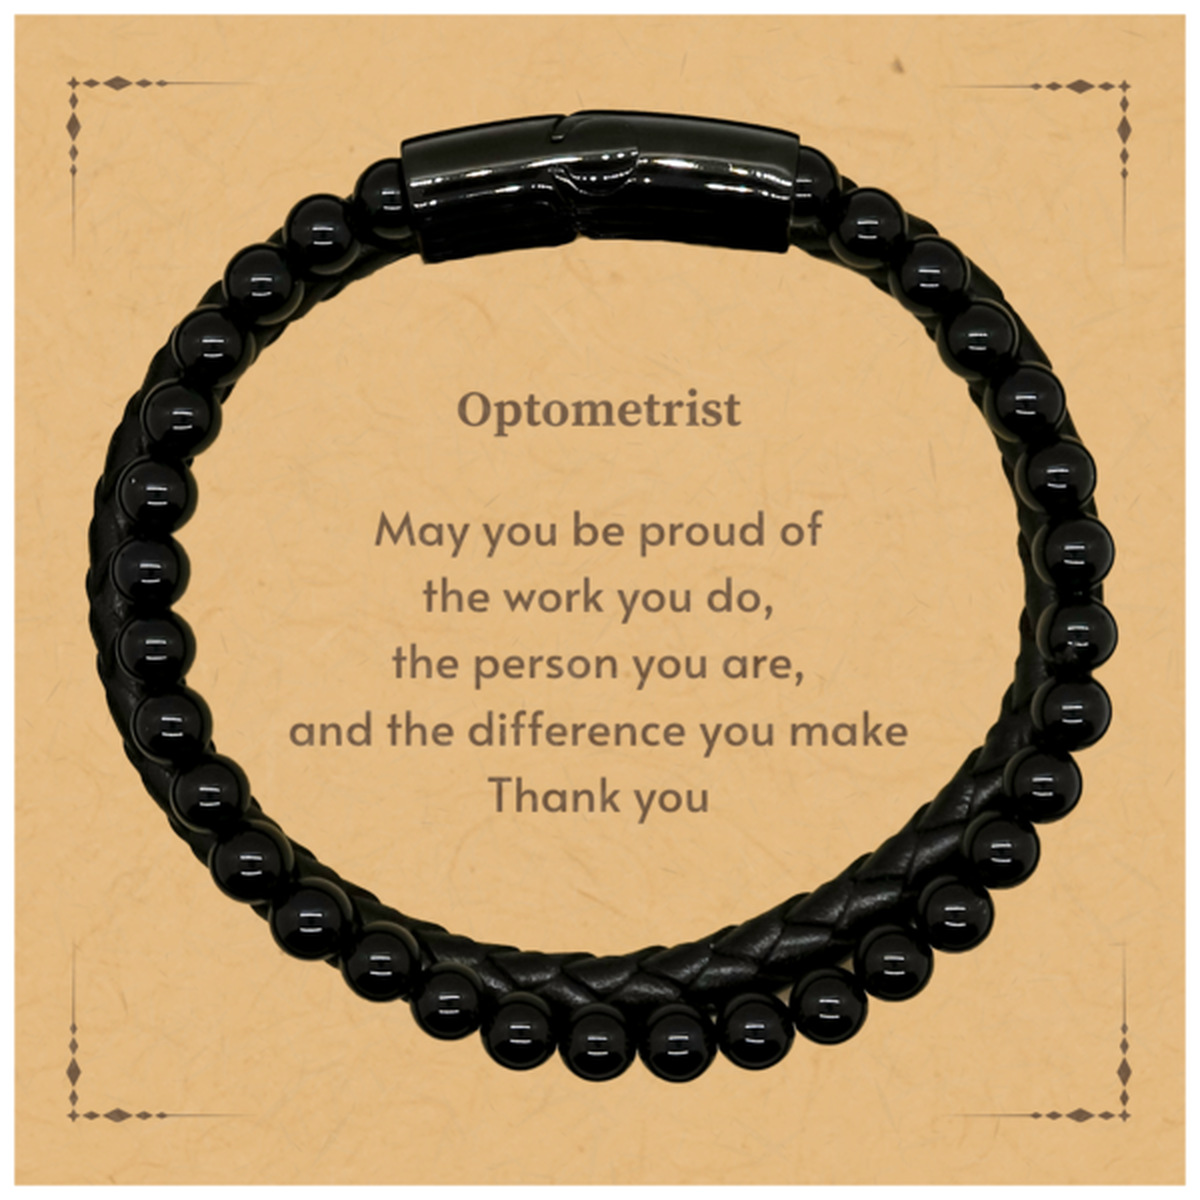 Heartwarming Stone Leather Bracelets Retirement Coworkers Gifts for Optometrist, Optometrist May You be proud of the work you do, the person you are Gifts for Boss Men Women Friends